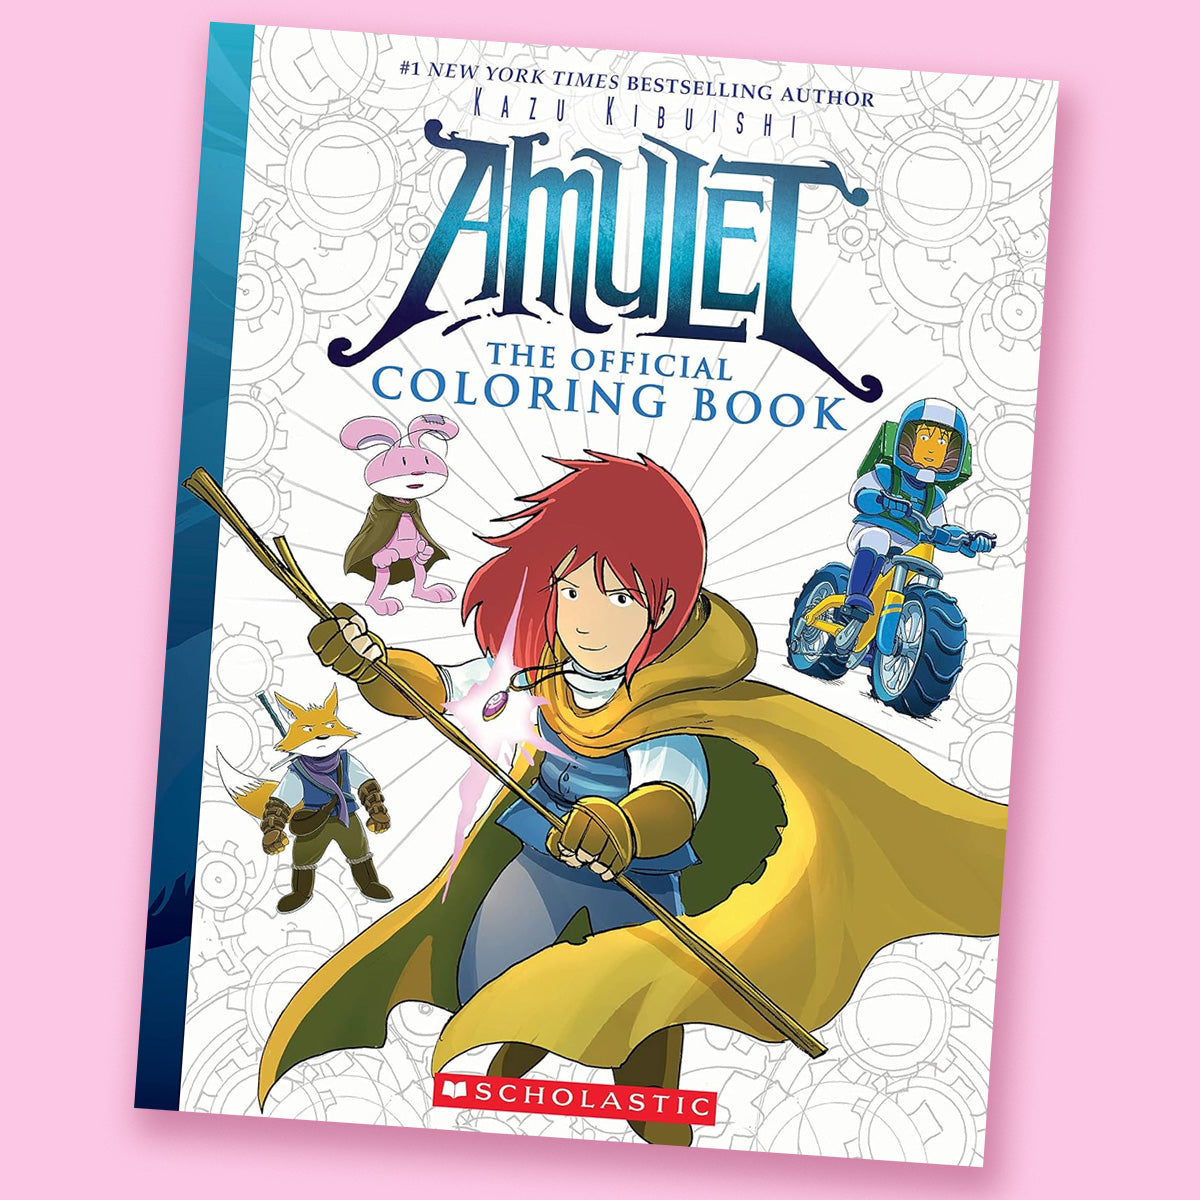 Amulet: The Official Coloring Book by Kazu Kibuishi